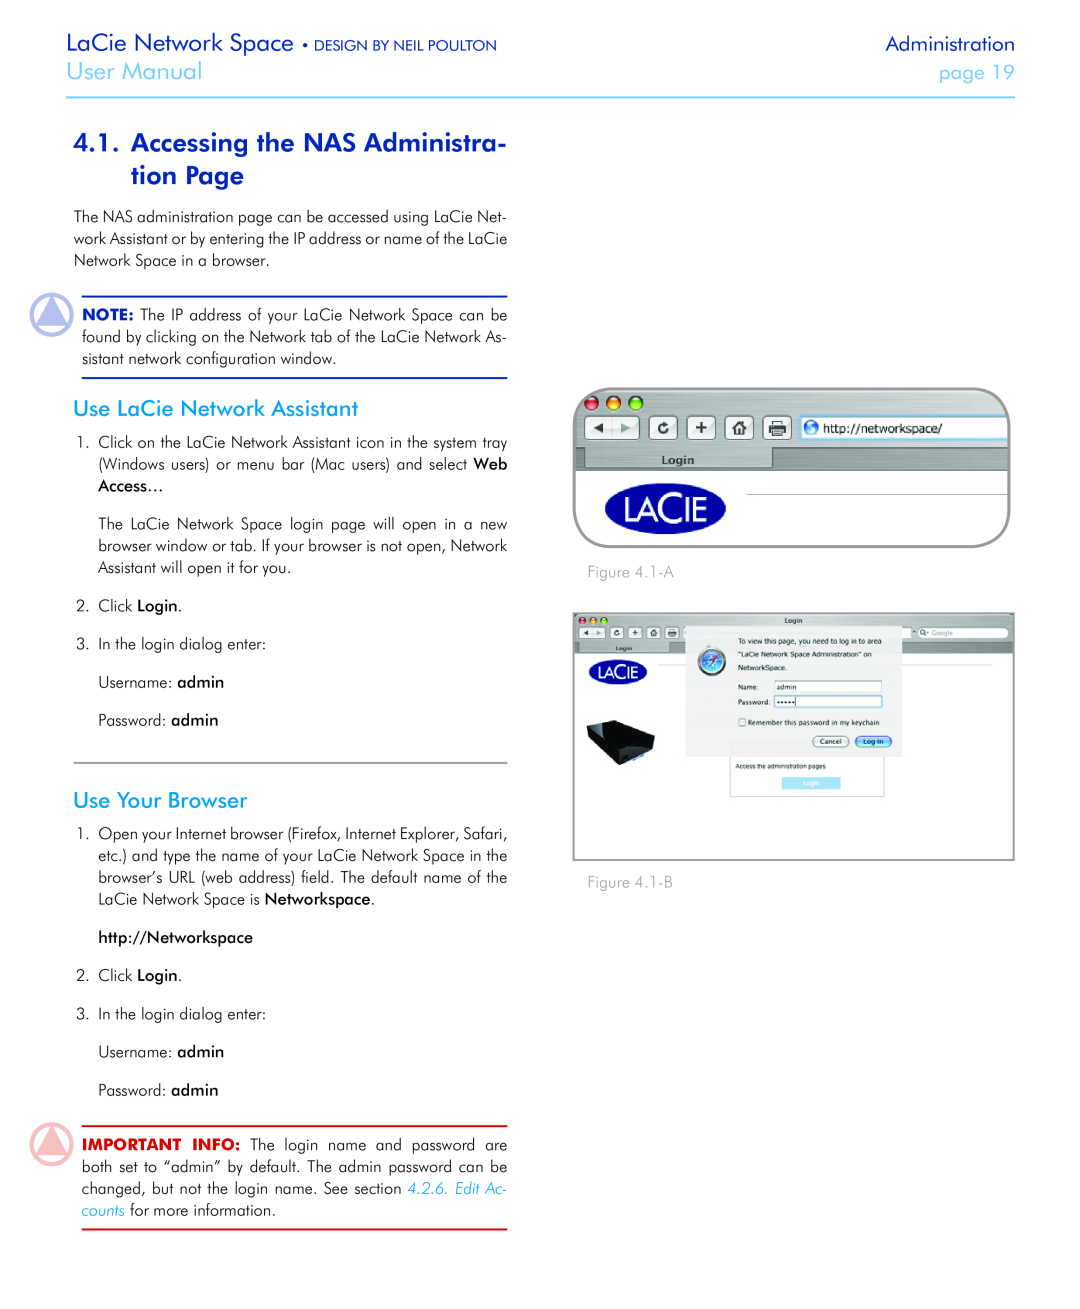 LaCie Network Space Accessing the NAS Administra- tion Page, Use LaCie Network Assistant, Use Your Browser, 1-A .1-B, page 